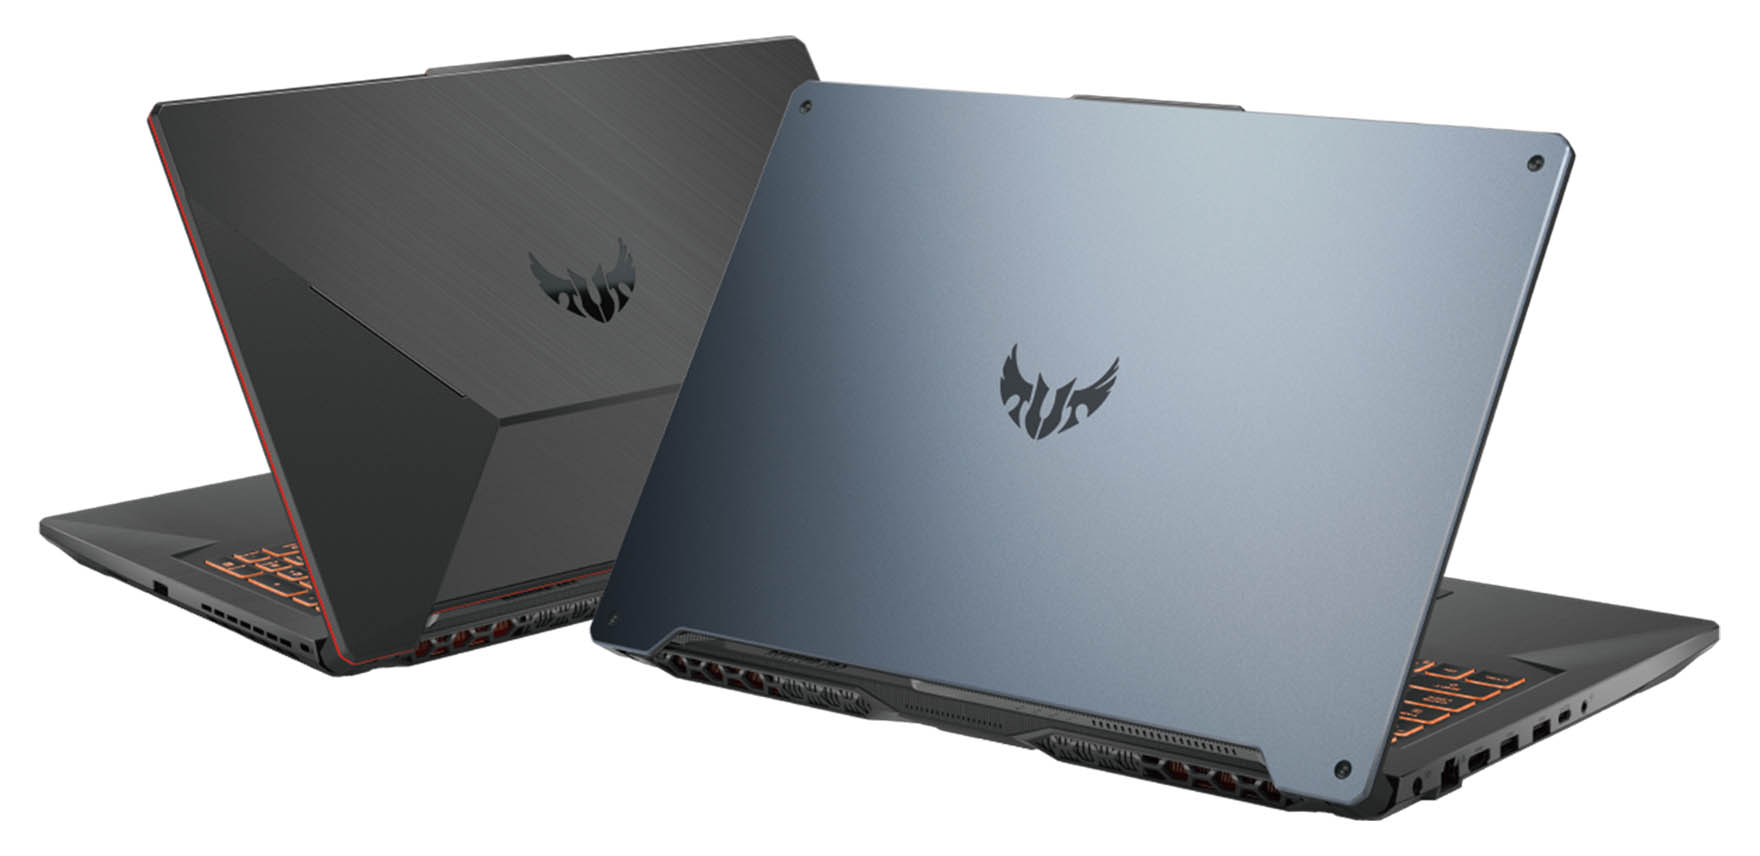 CES 2020: ASUS unveils Zephyrus G14 and Ryzen-powered TUF Gaming laptops